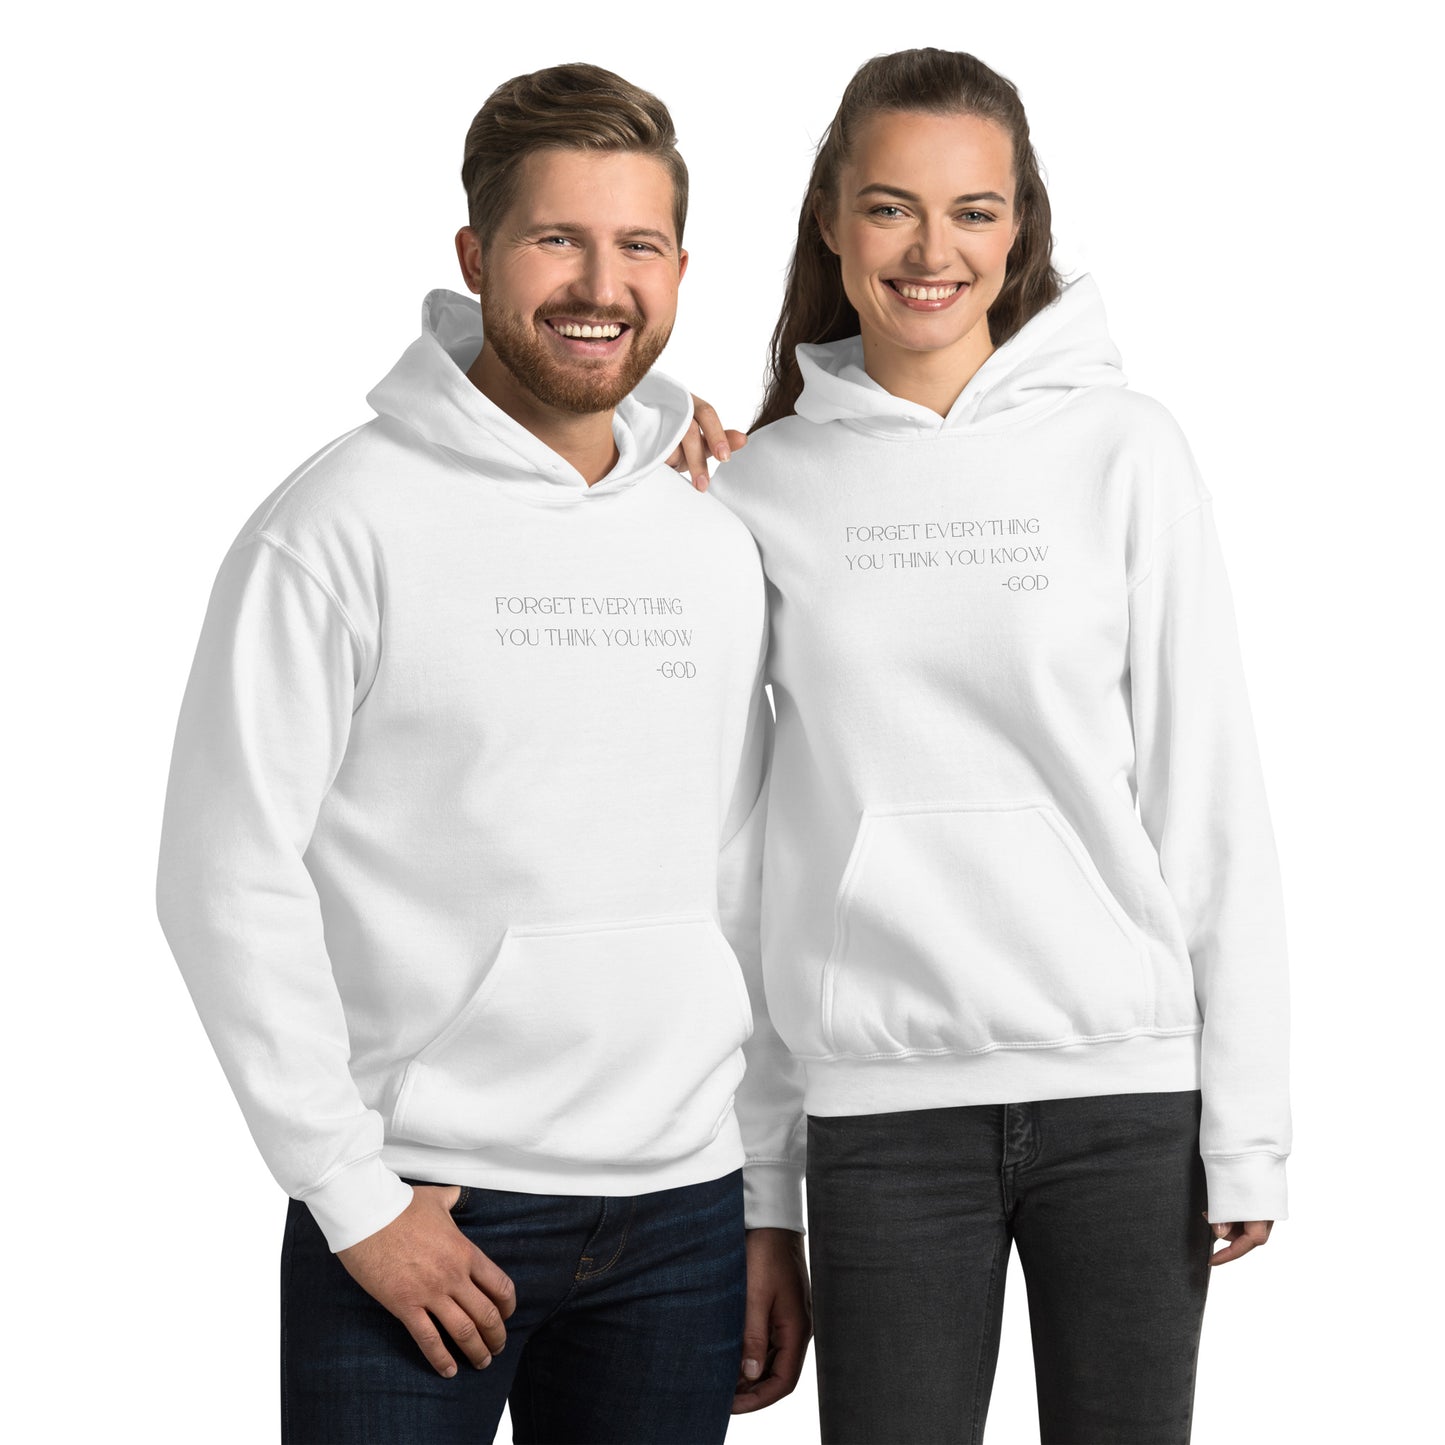 Forget Everything You Think You Know -GOD Unisex Hoodie